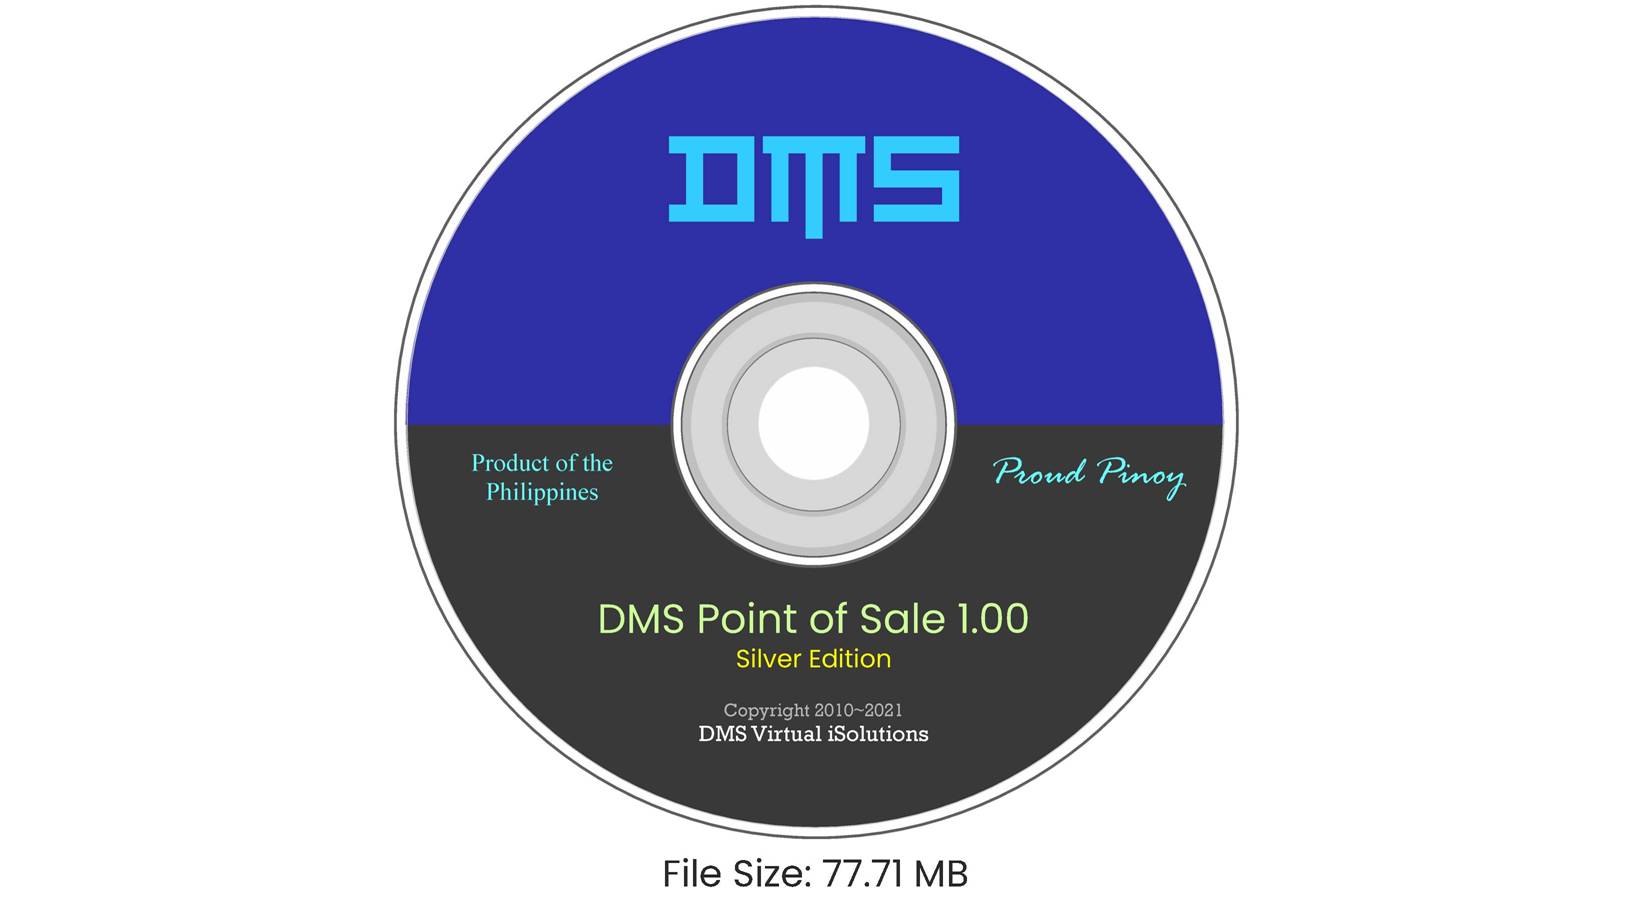 DMS Point of Sale 1.00 Silver Edition